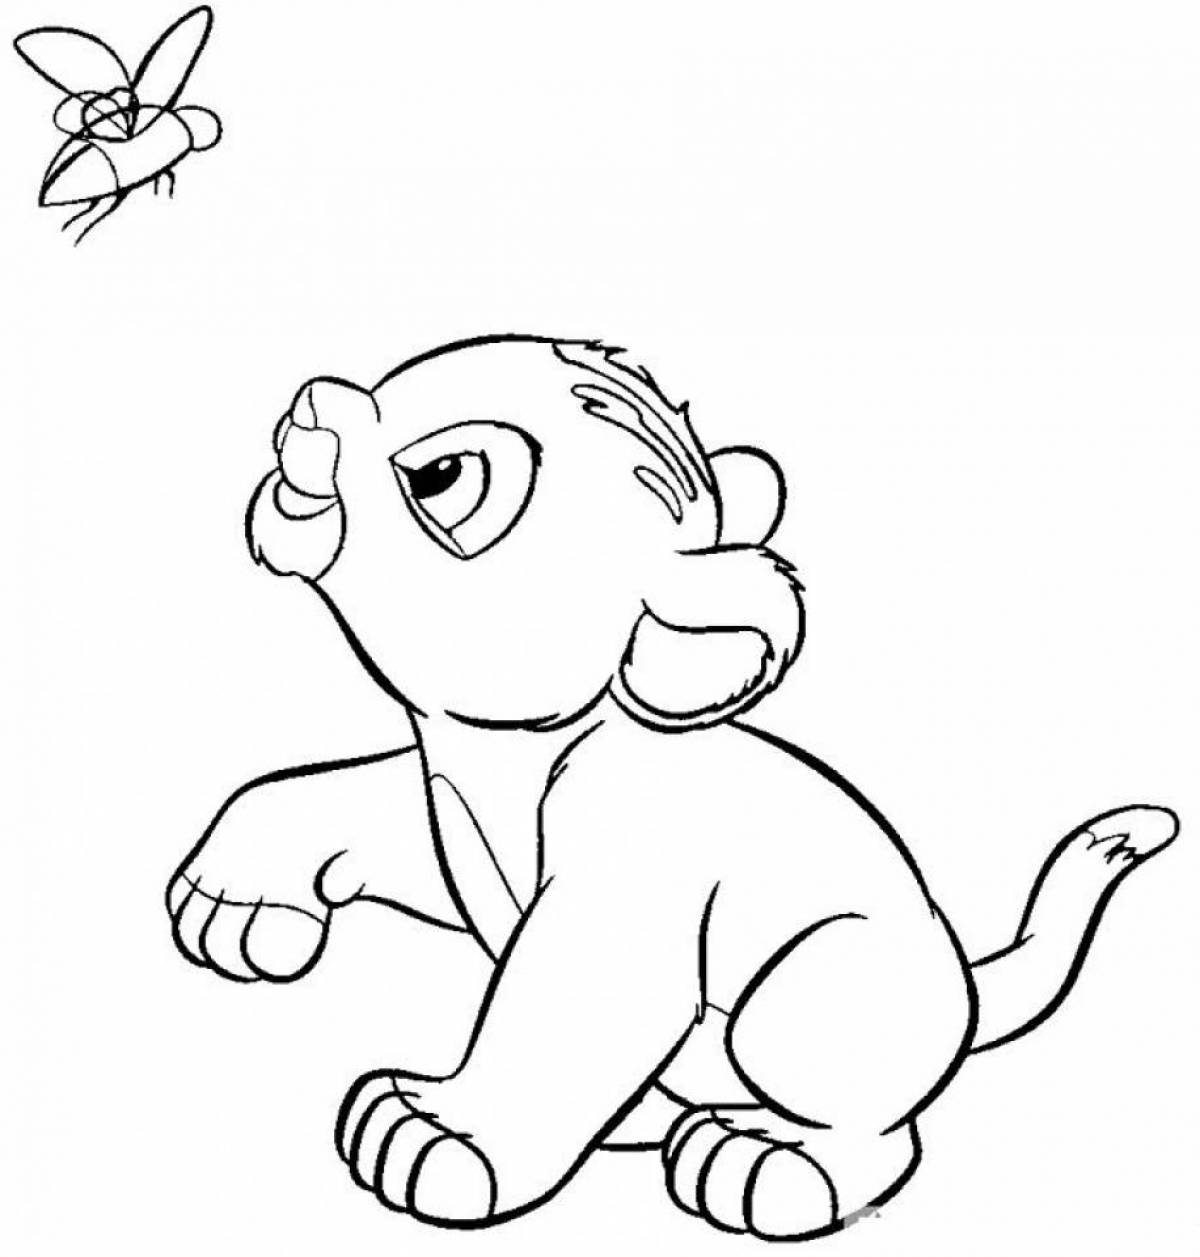 Colouring excited simba